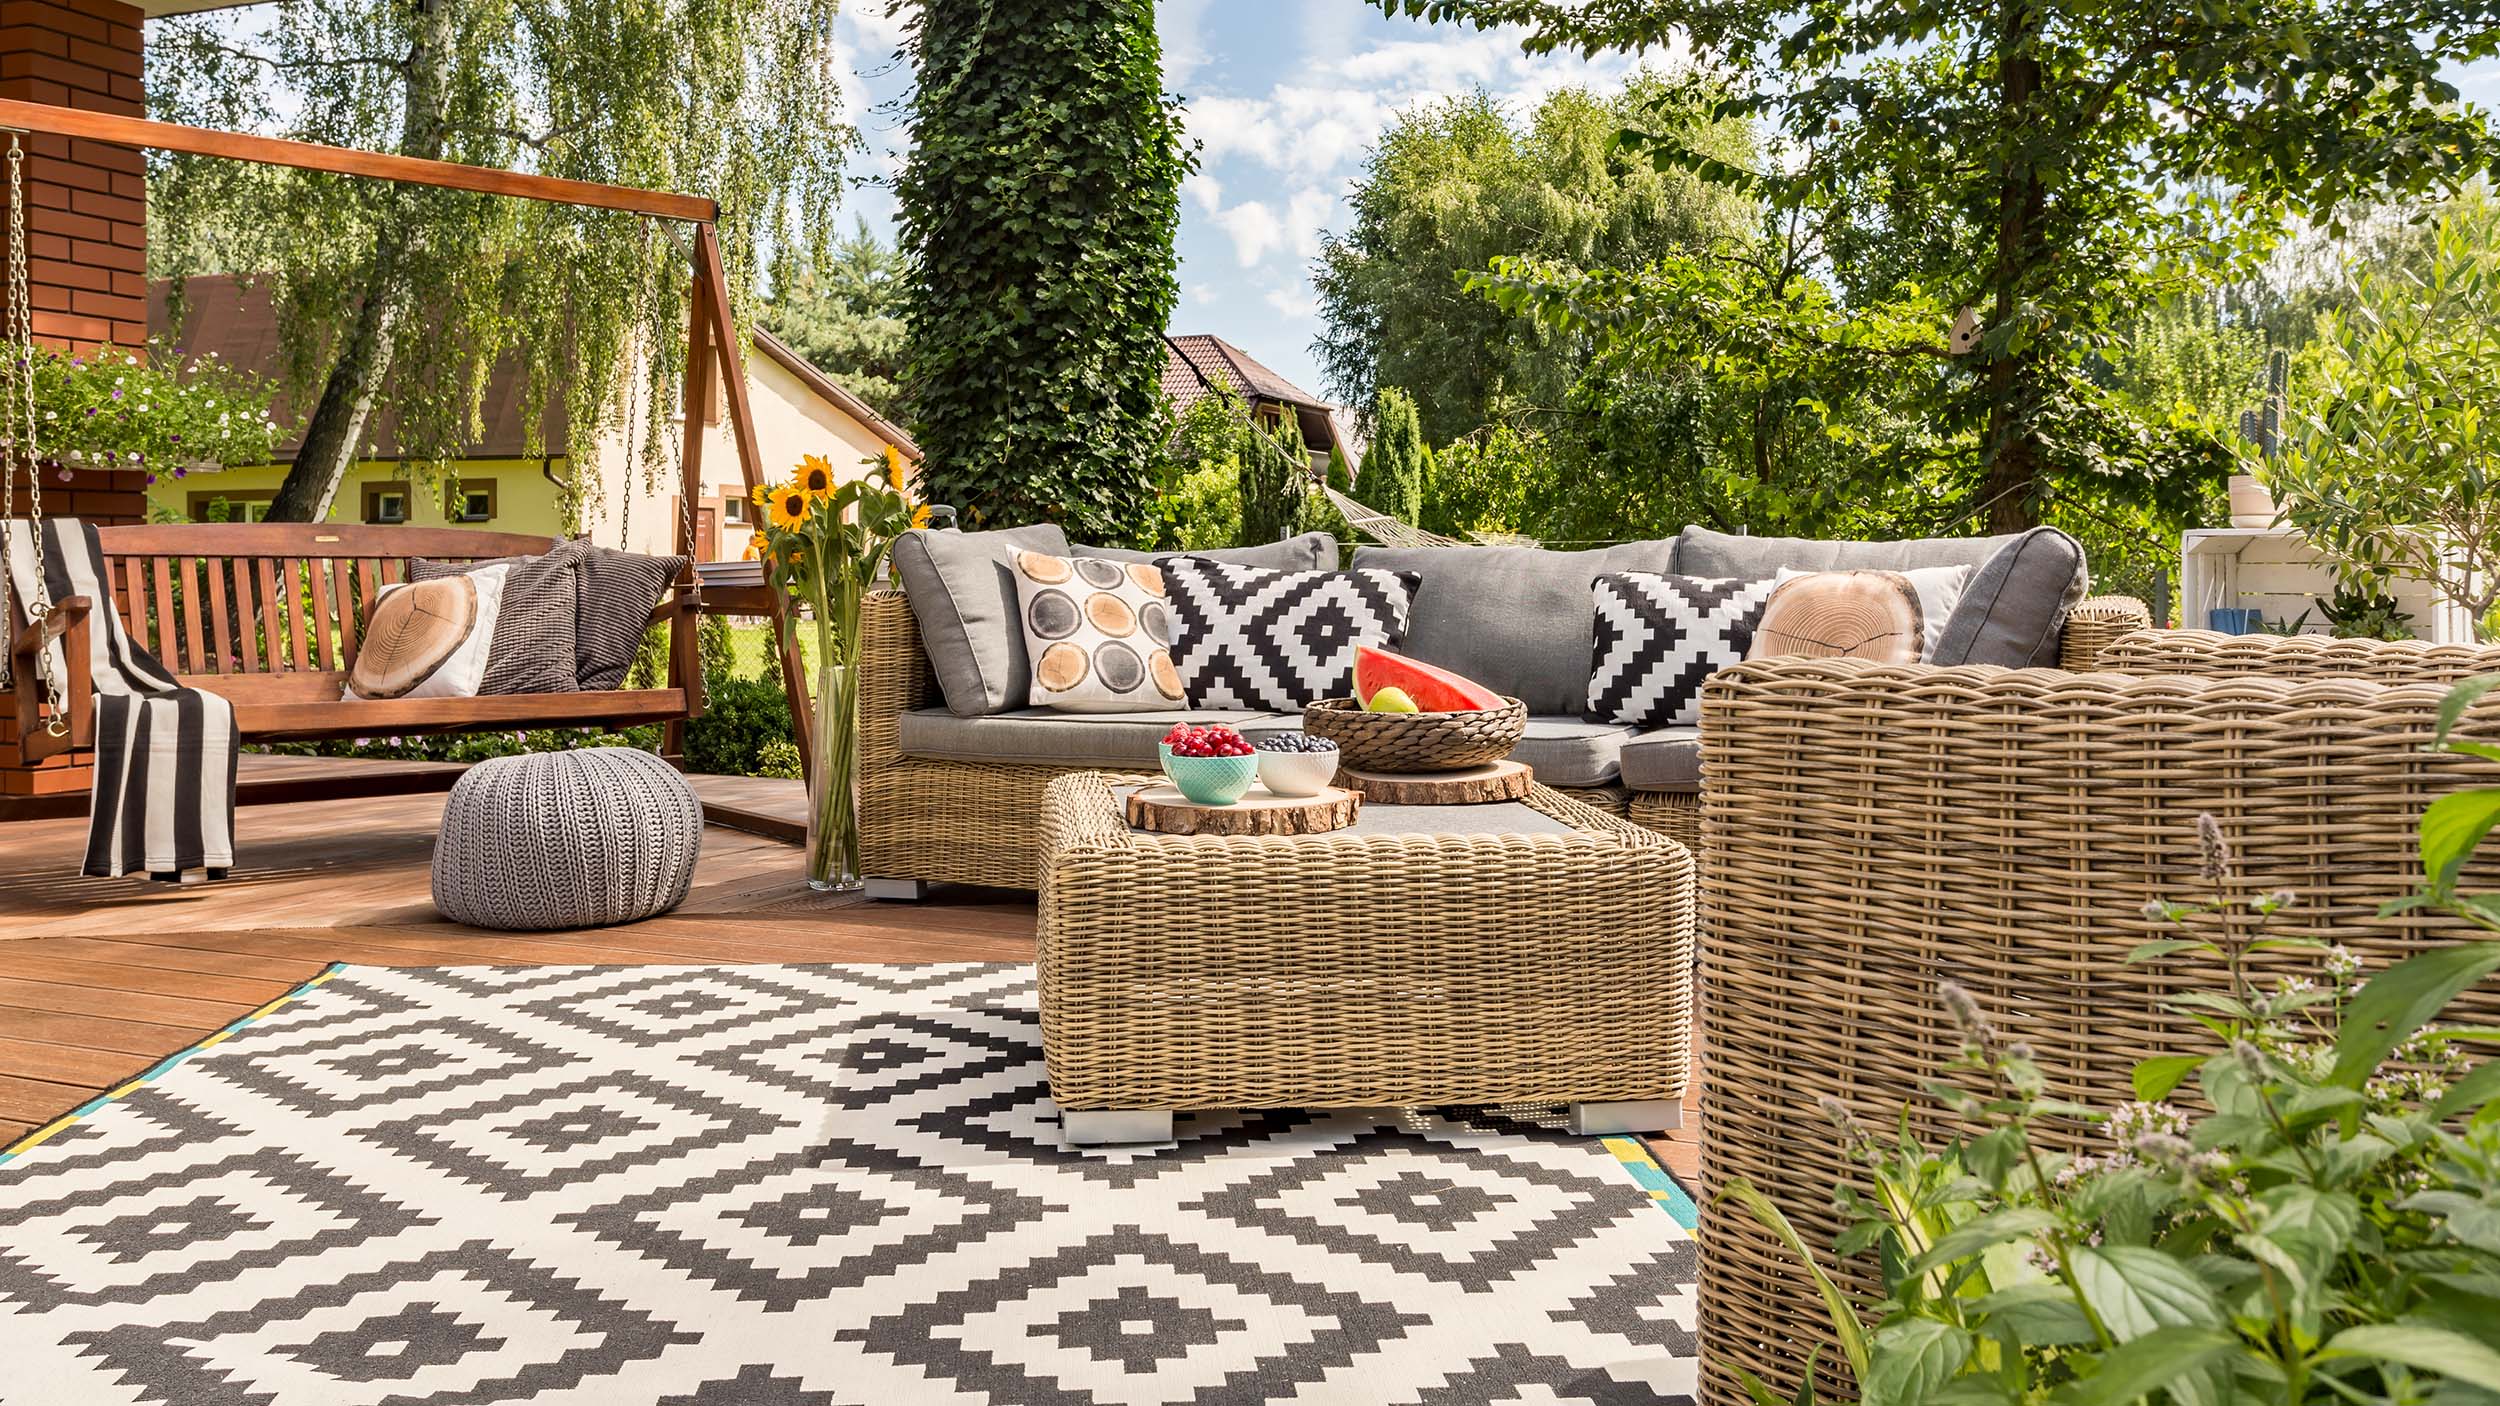 How to clean outdoor furniture for long-term use